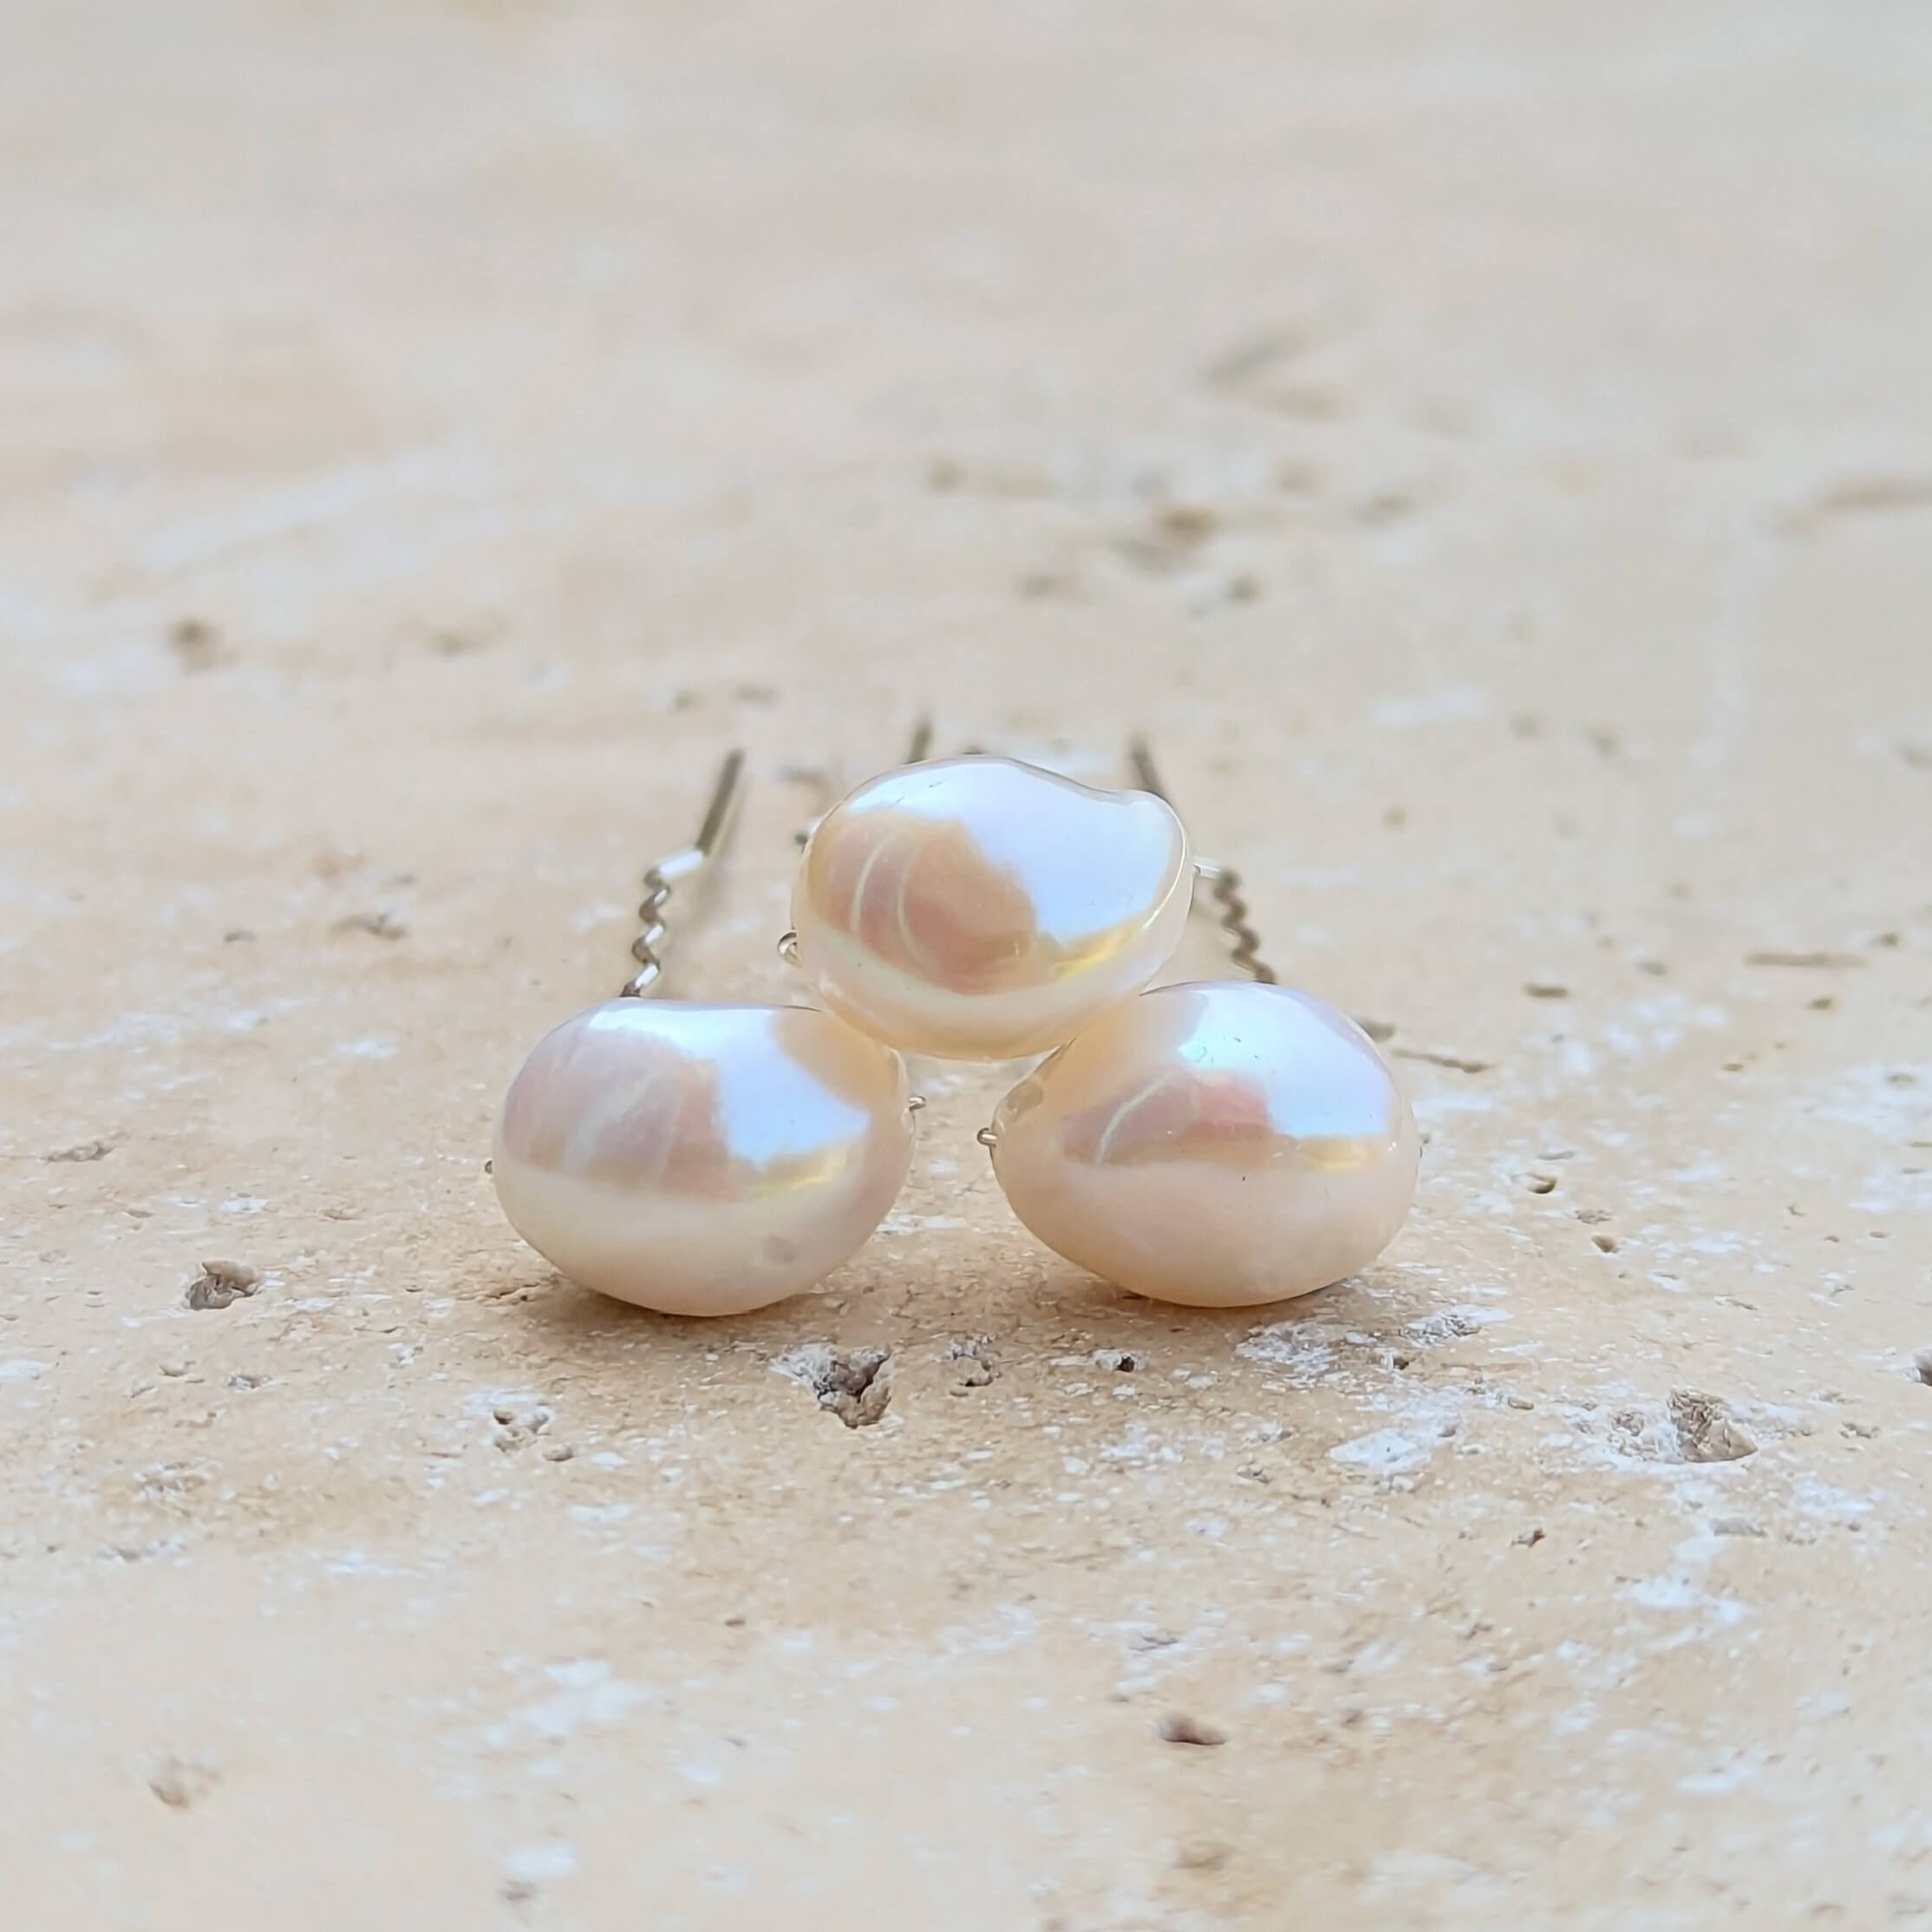 Three large white real pearls on silver hair pins